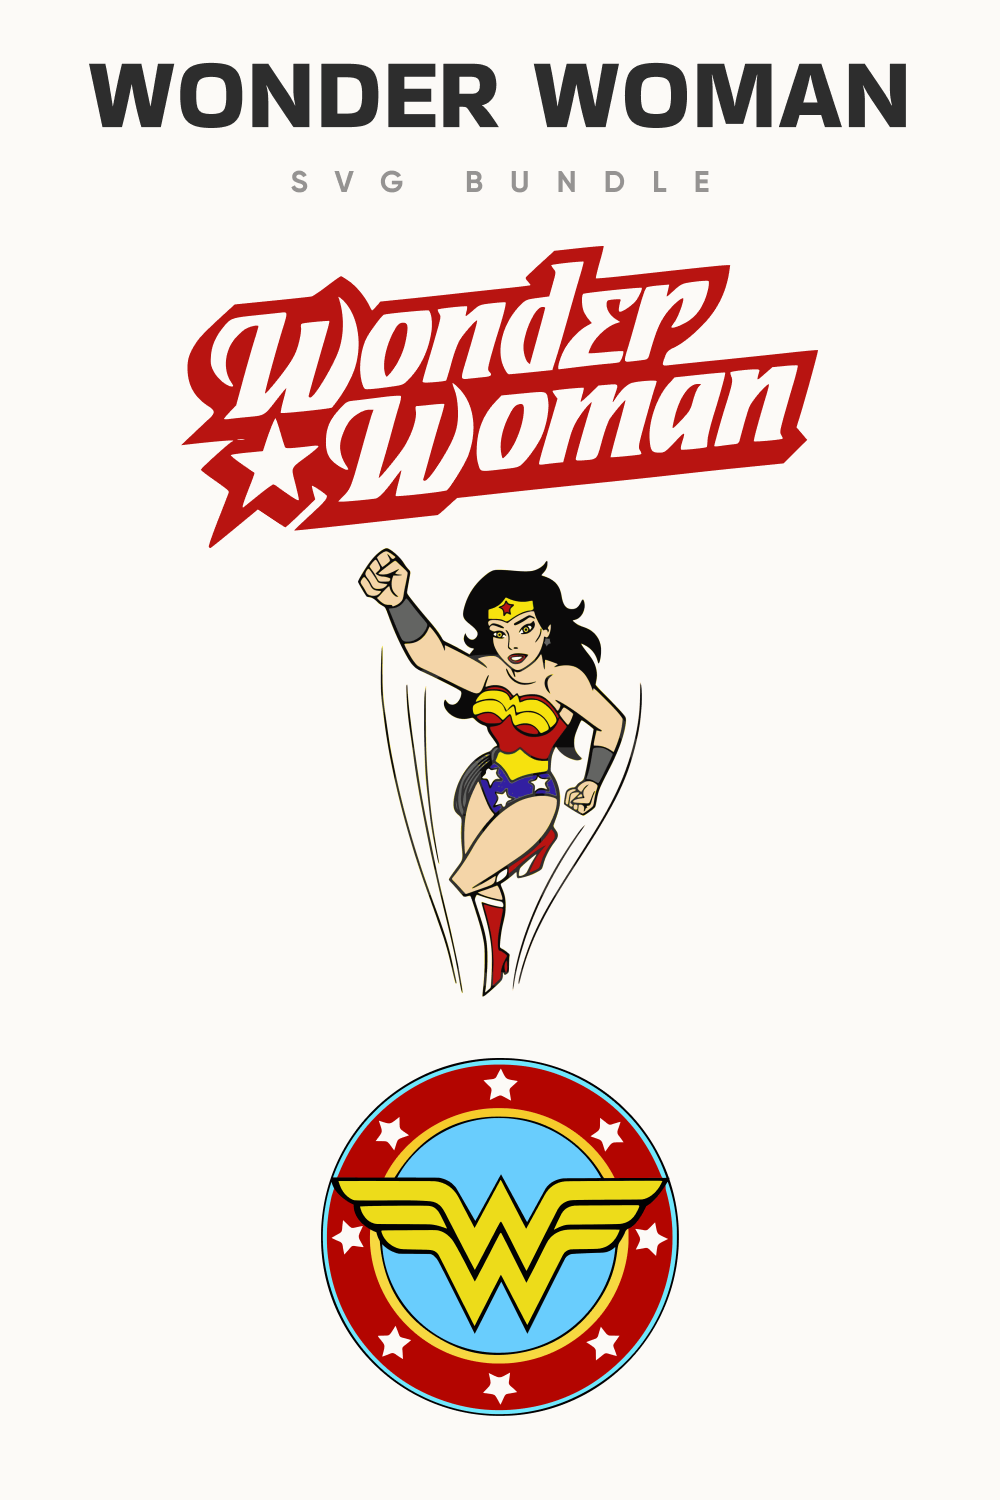 Colorful wonder women for you.